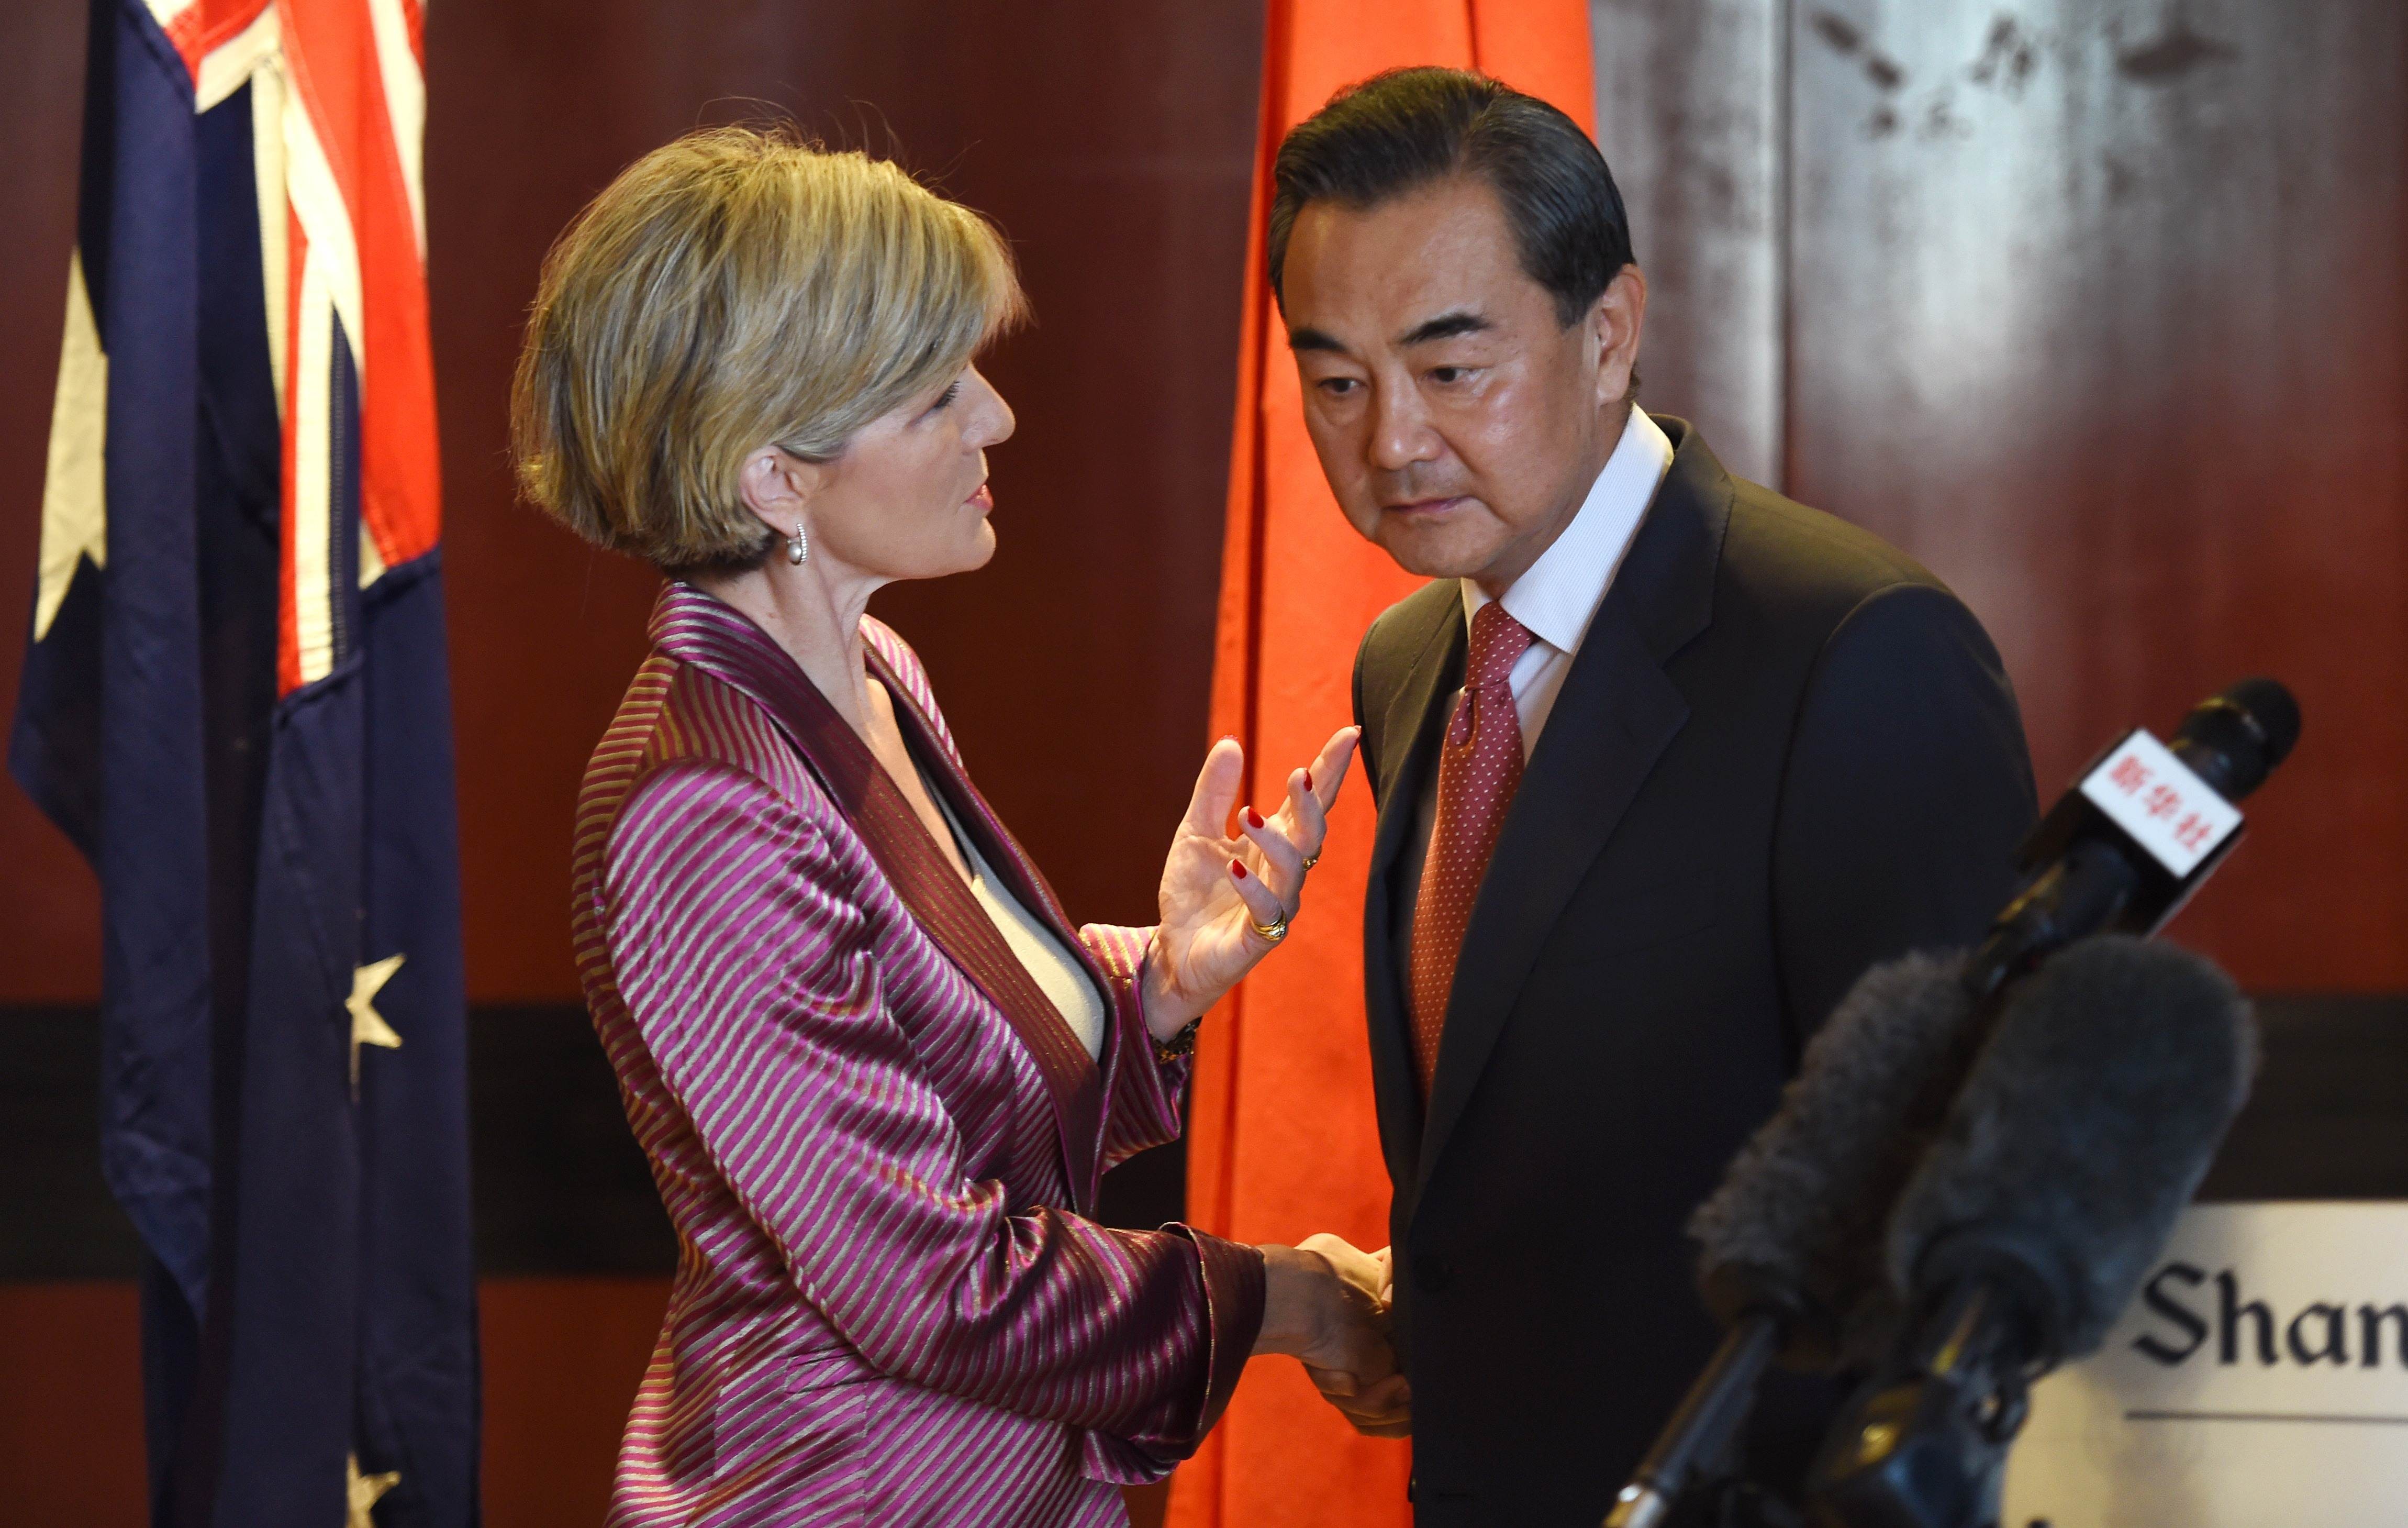 Australian Minister for Foreign Affairs Julie Bishop and Chinese Foreign Minister Wang Yi shake hands in Sydney on September 7, 2014. Photo: AFP